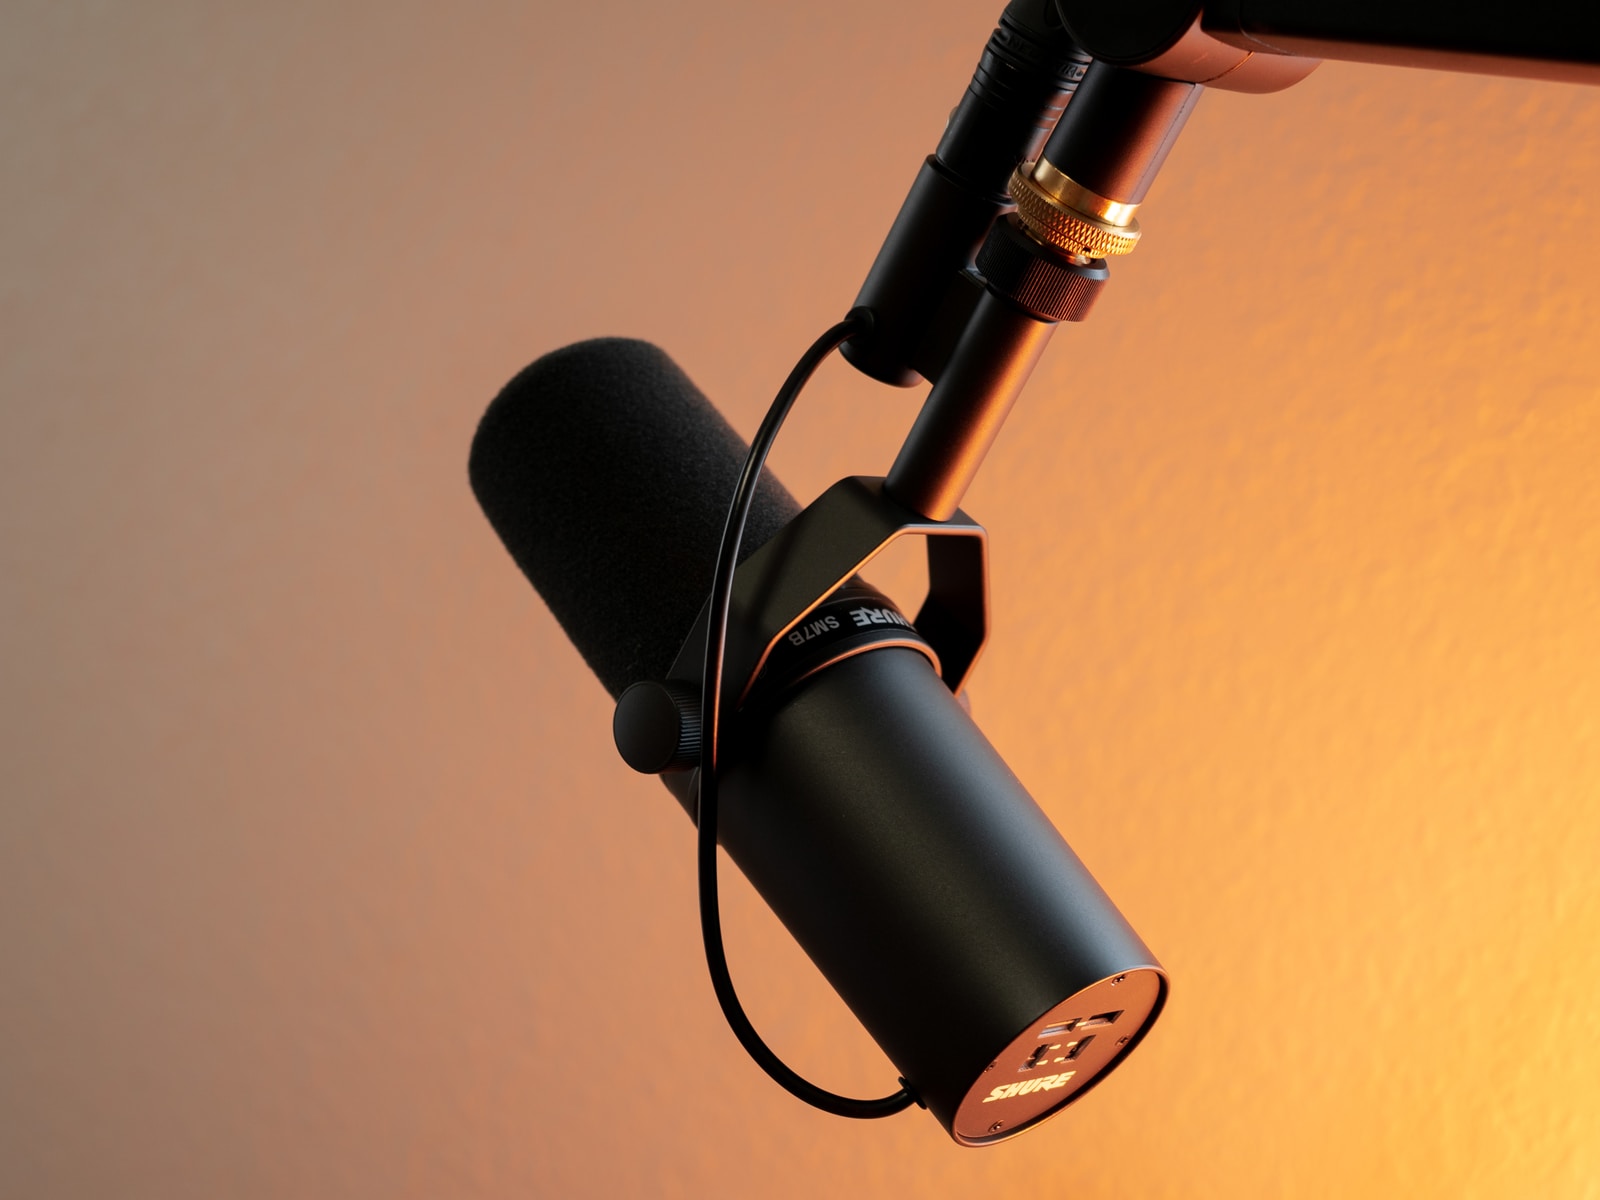 black and silver microphone on brown wall